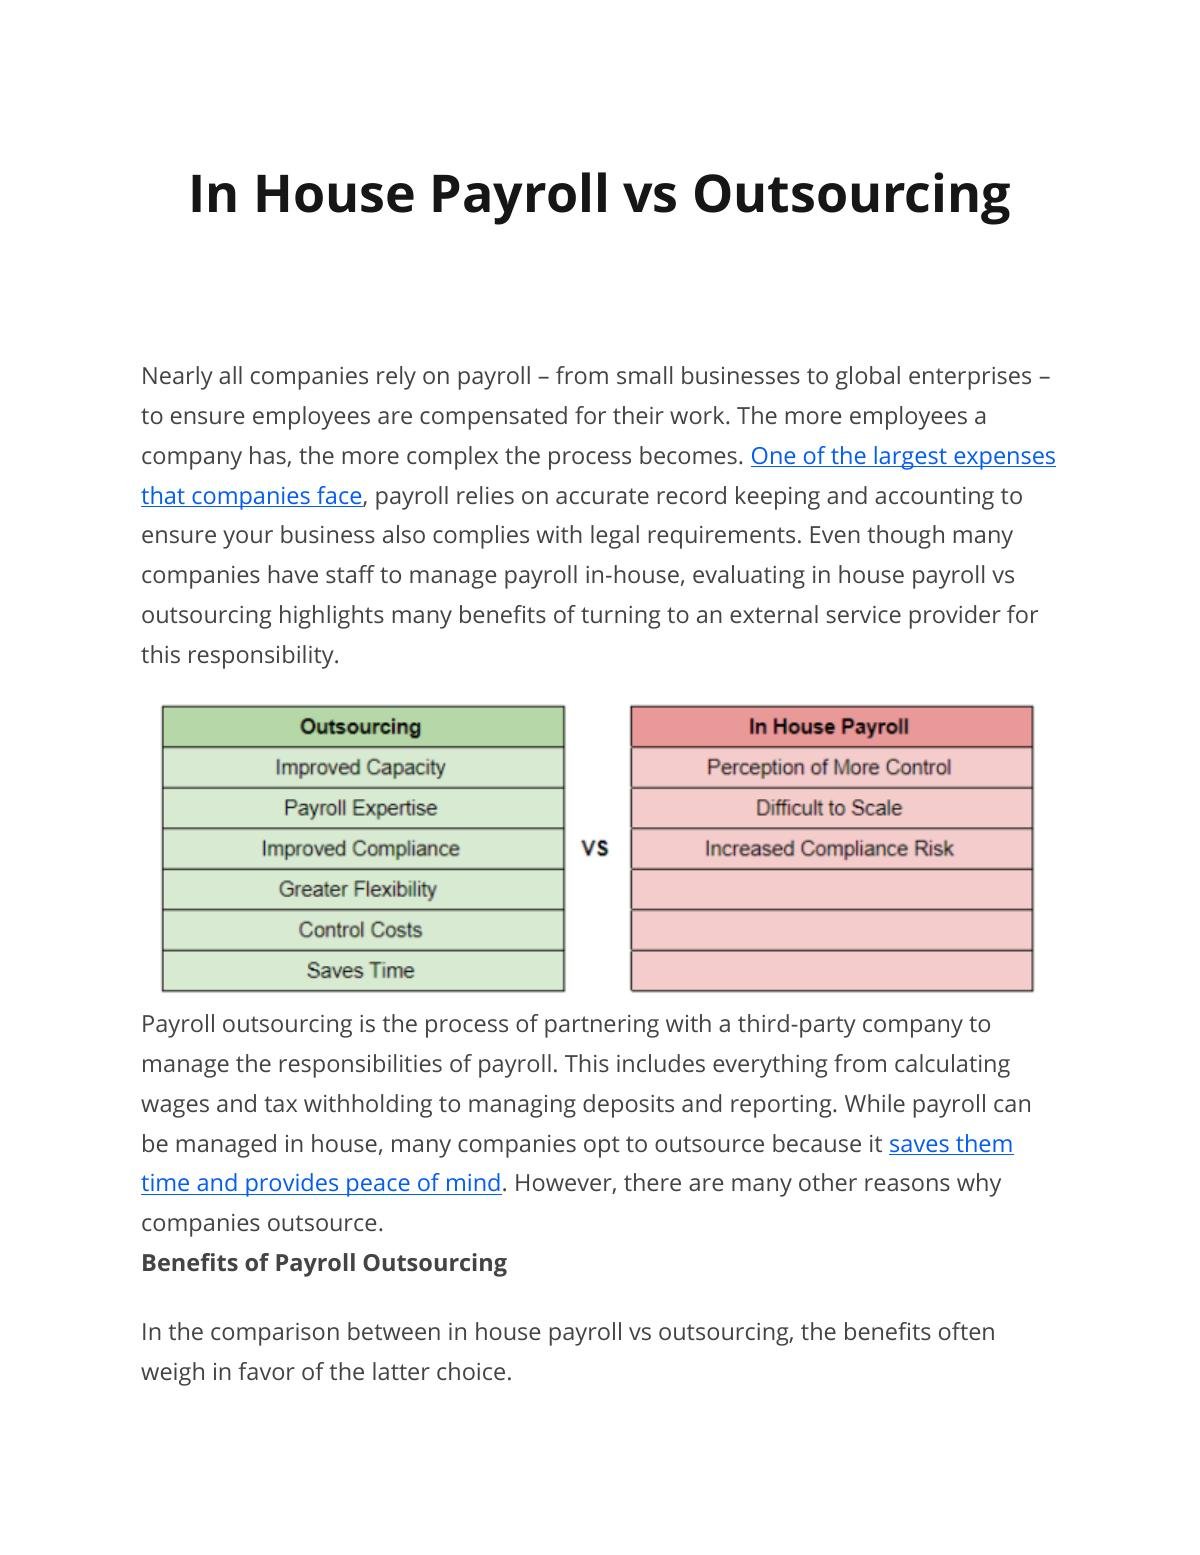 In House Payroll vs Outsourcing